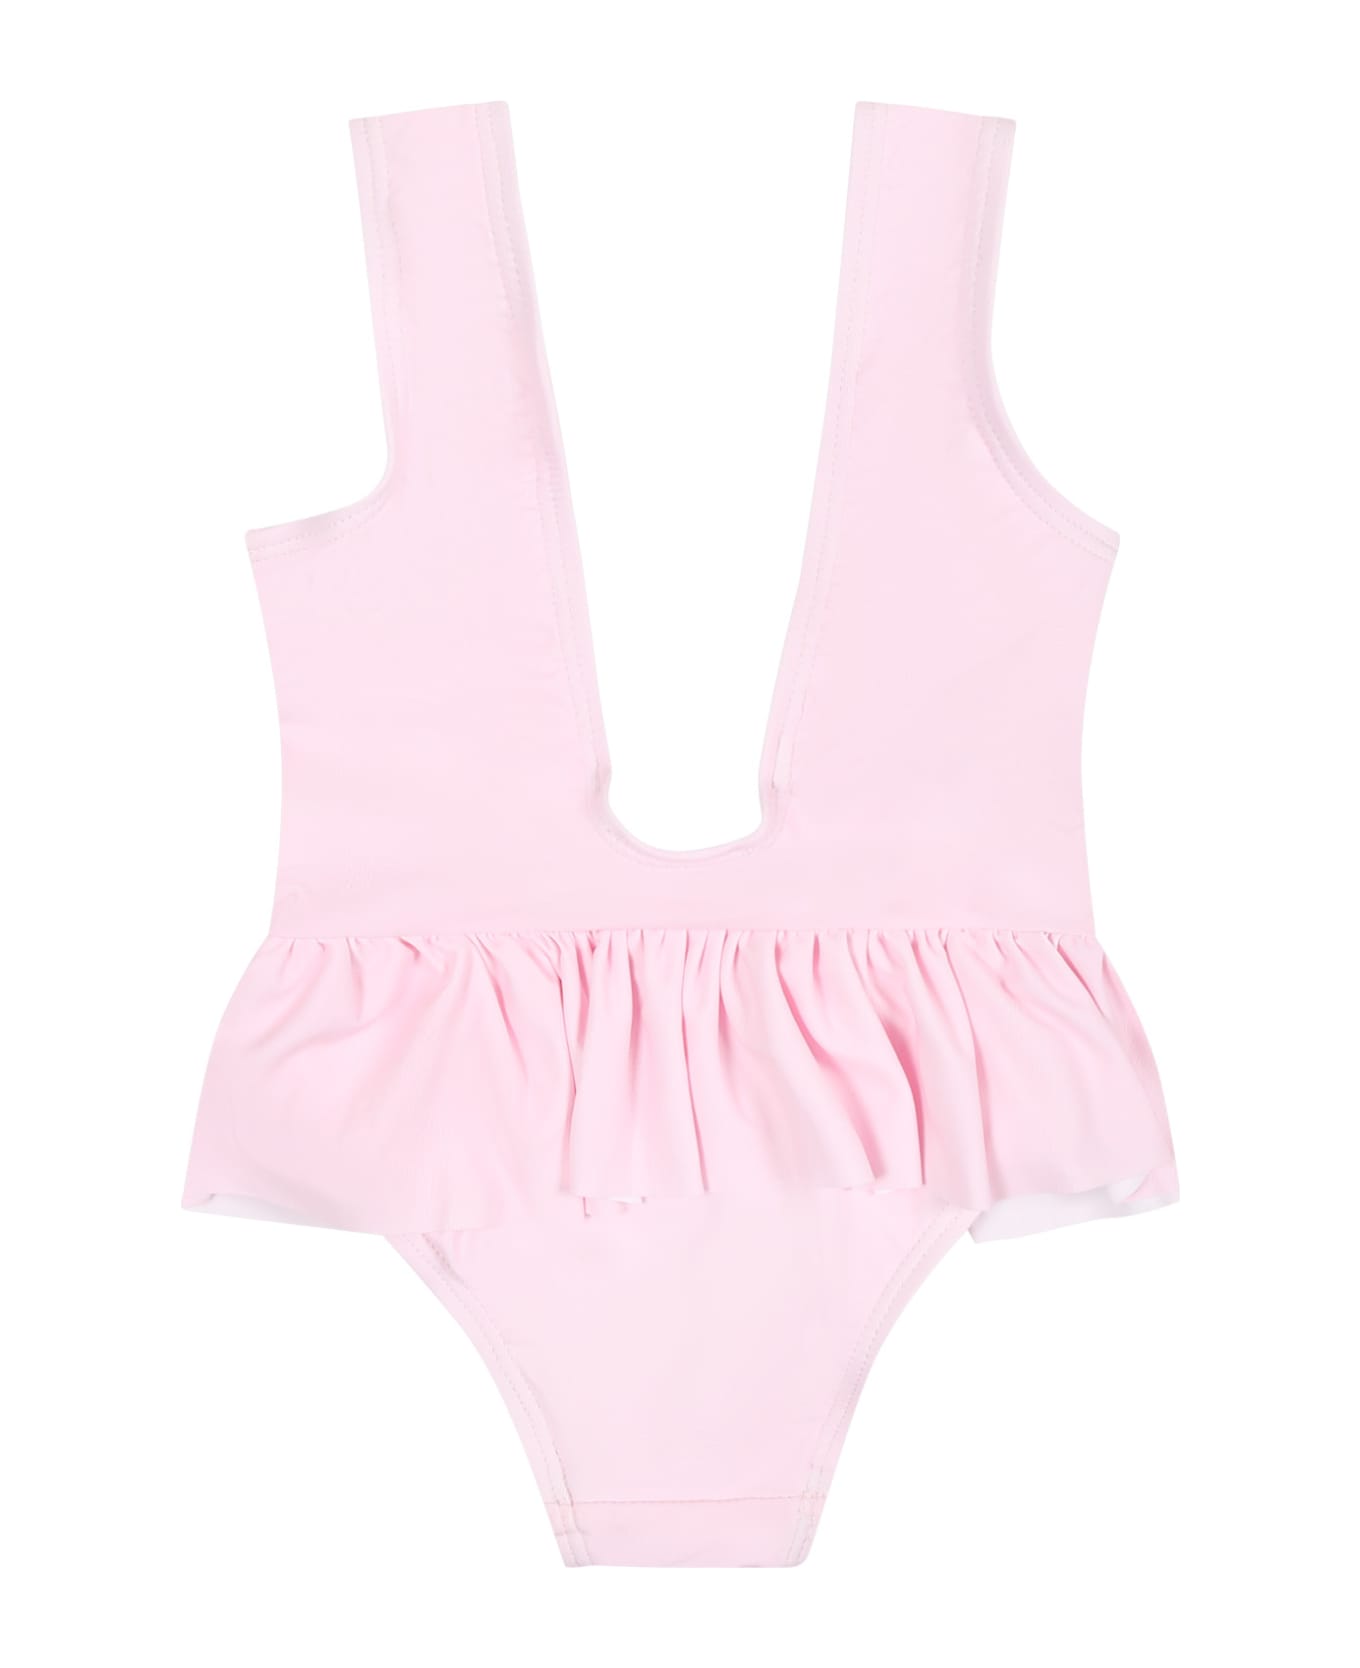 Chiara Ferragni Pink Swimsuit For Baby Girl With Ruffles And Flowers - Pink